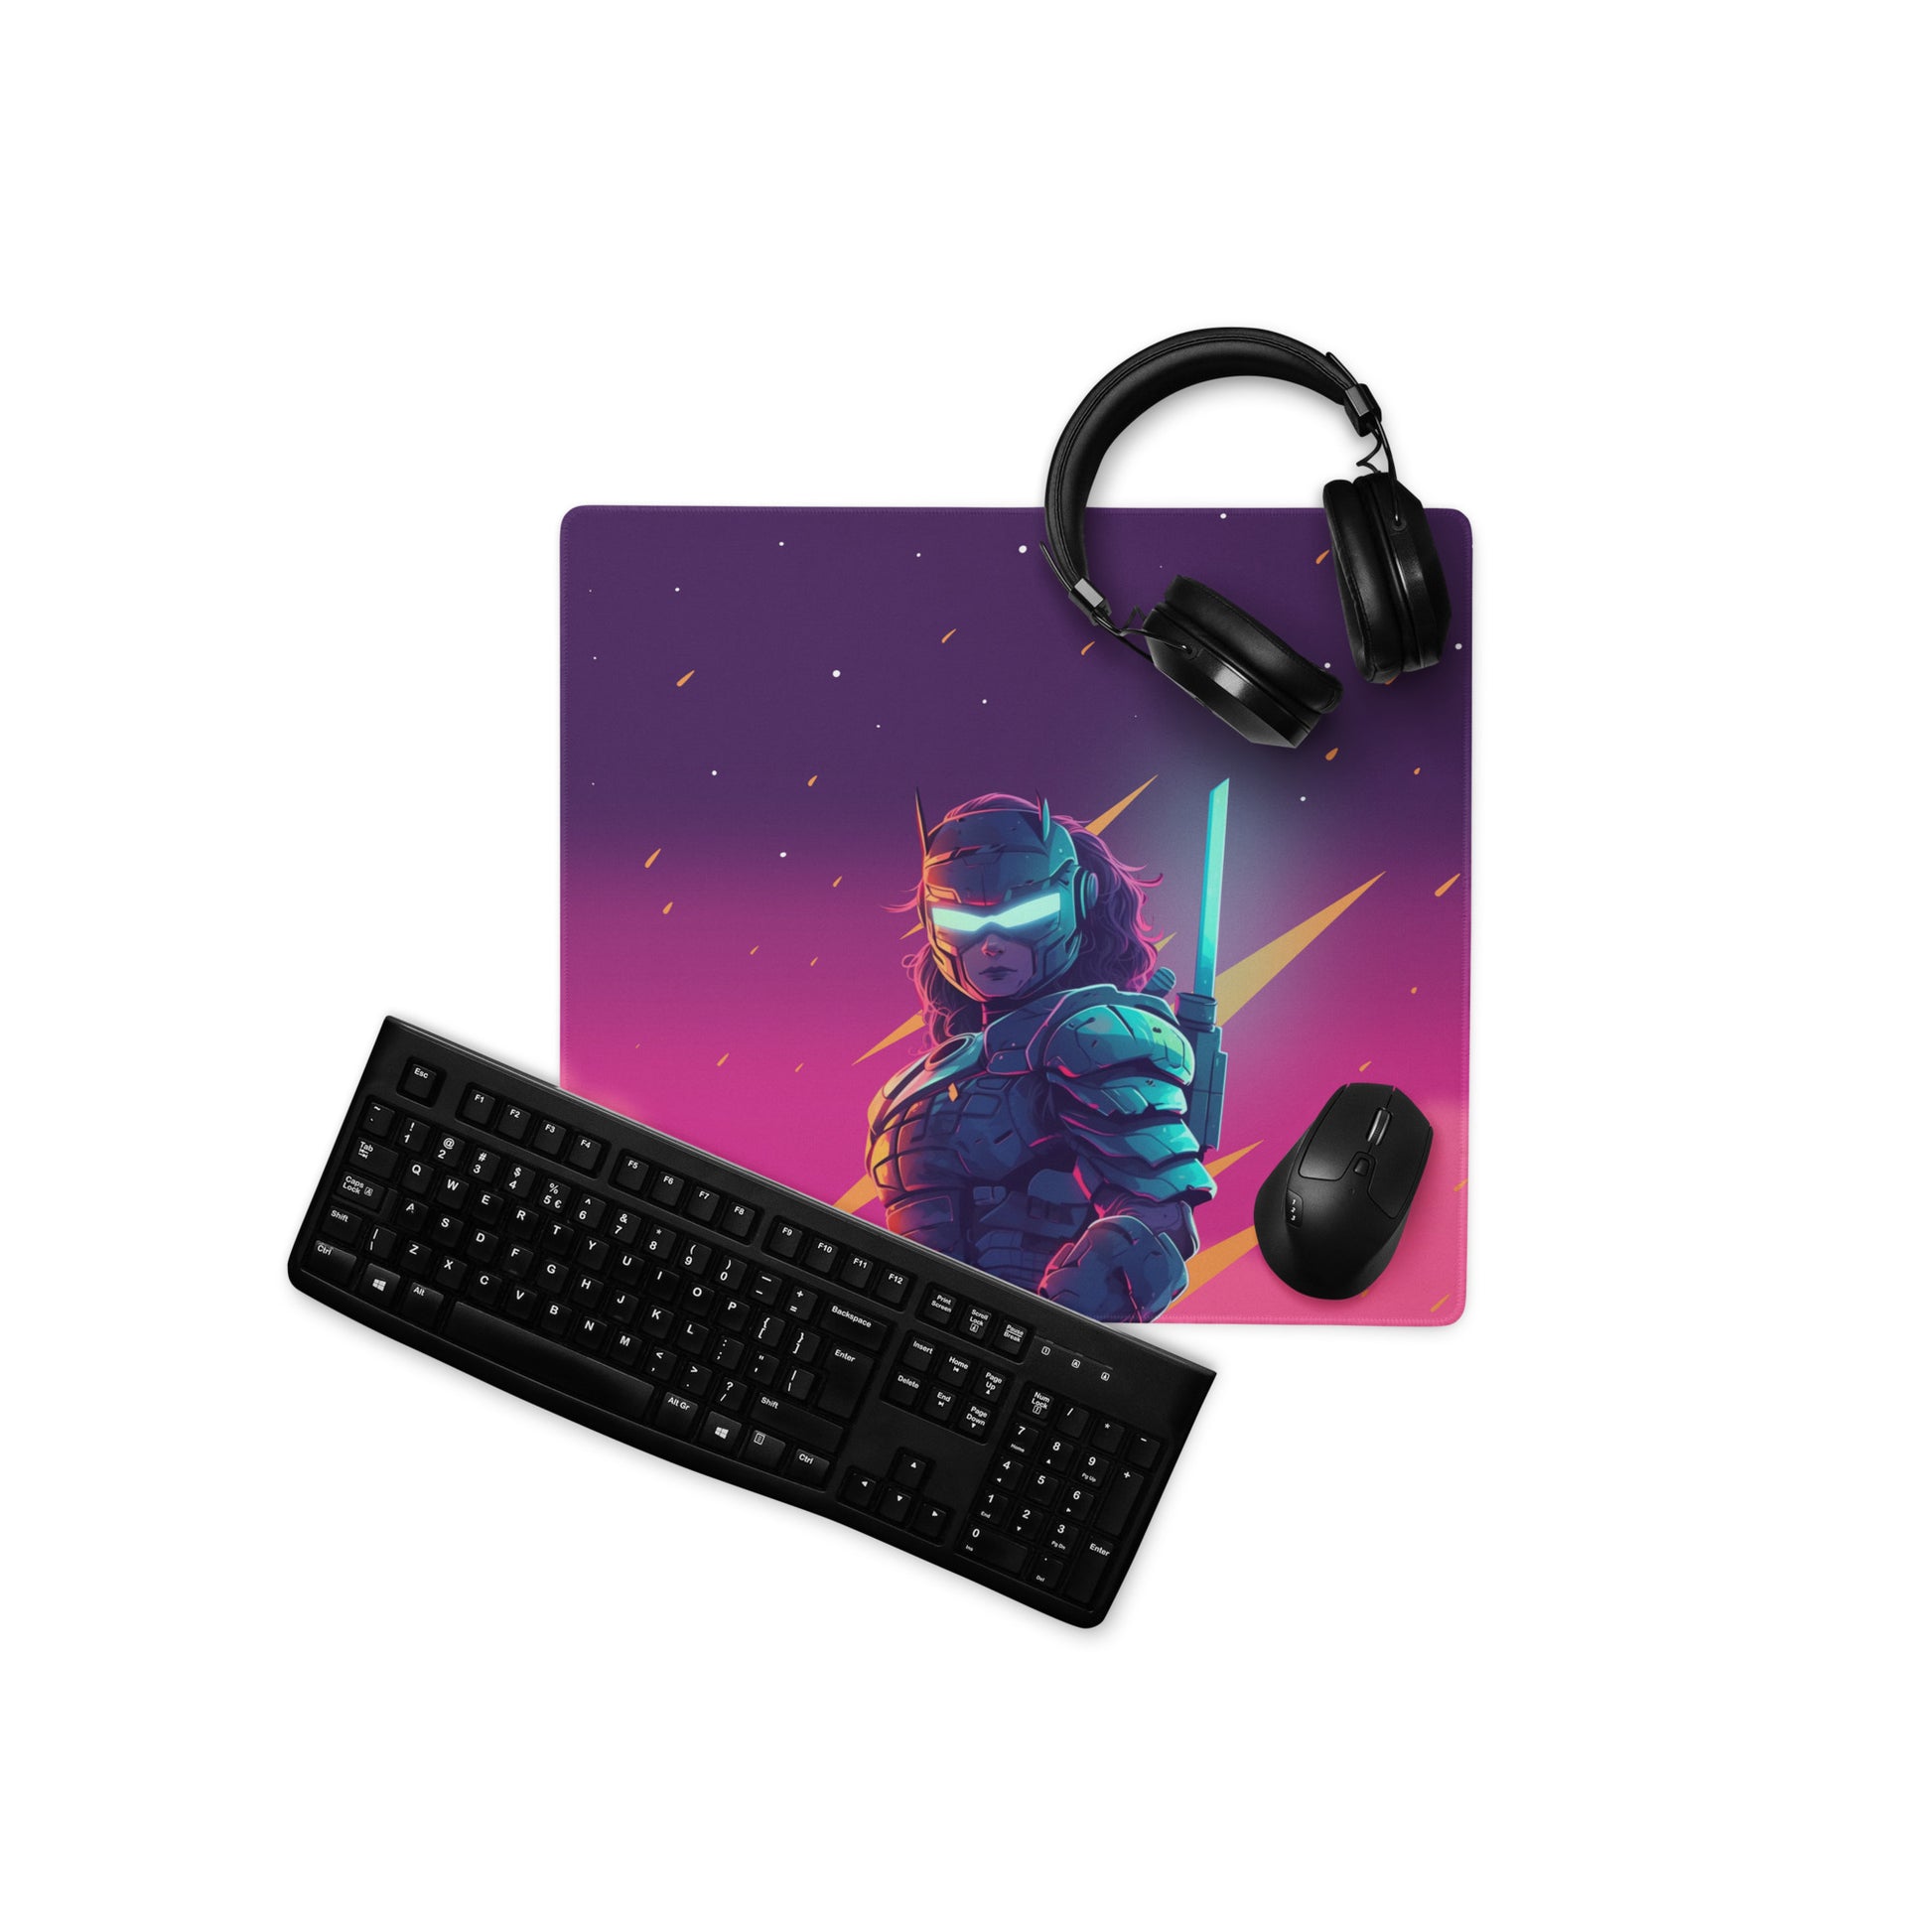 A 18" x 16" pink and purple desk pad with a futuristic samurai. With a keyboard, mouse, and headphones sitting on it.